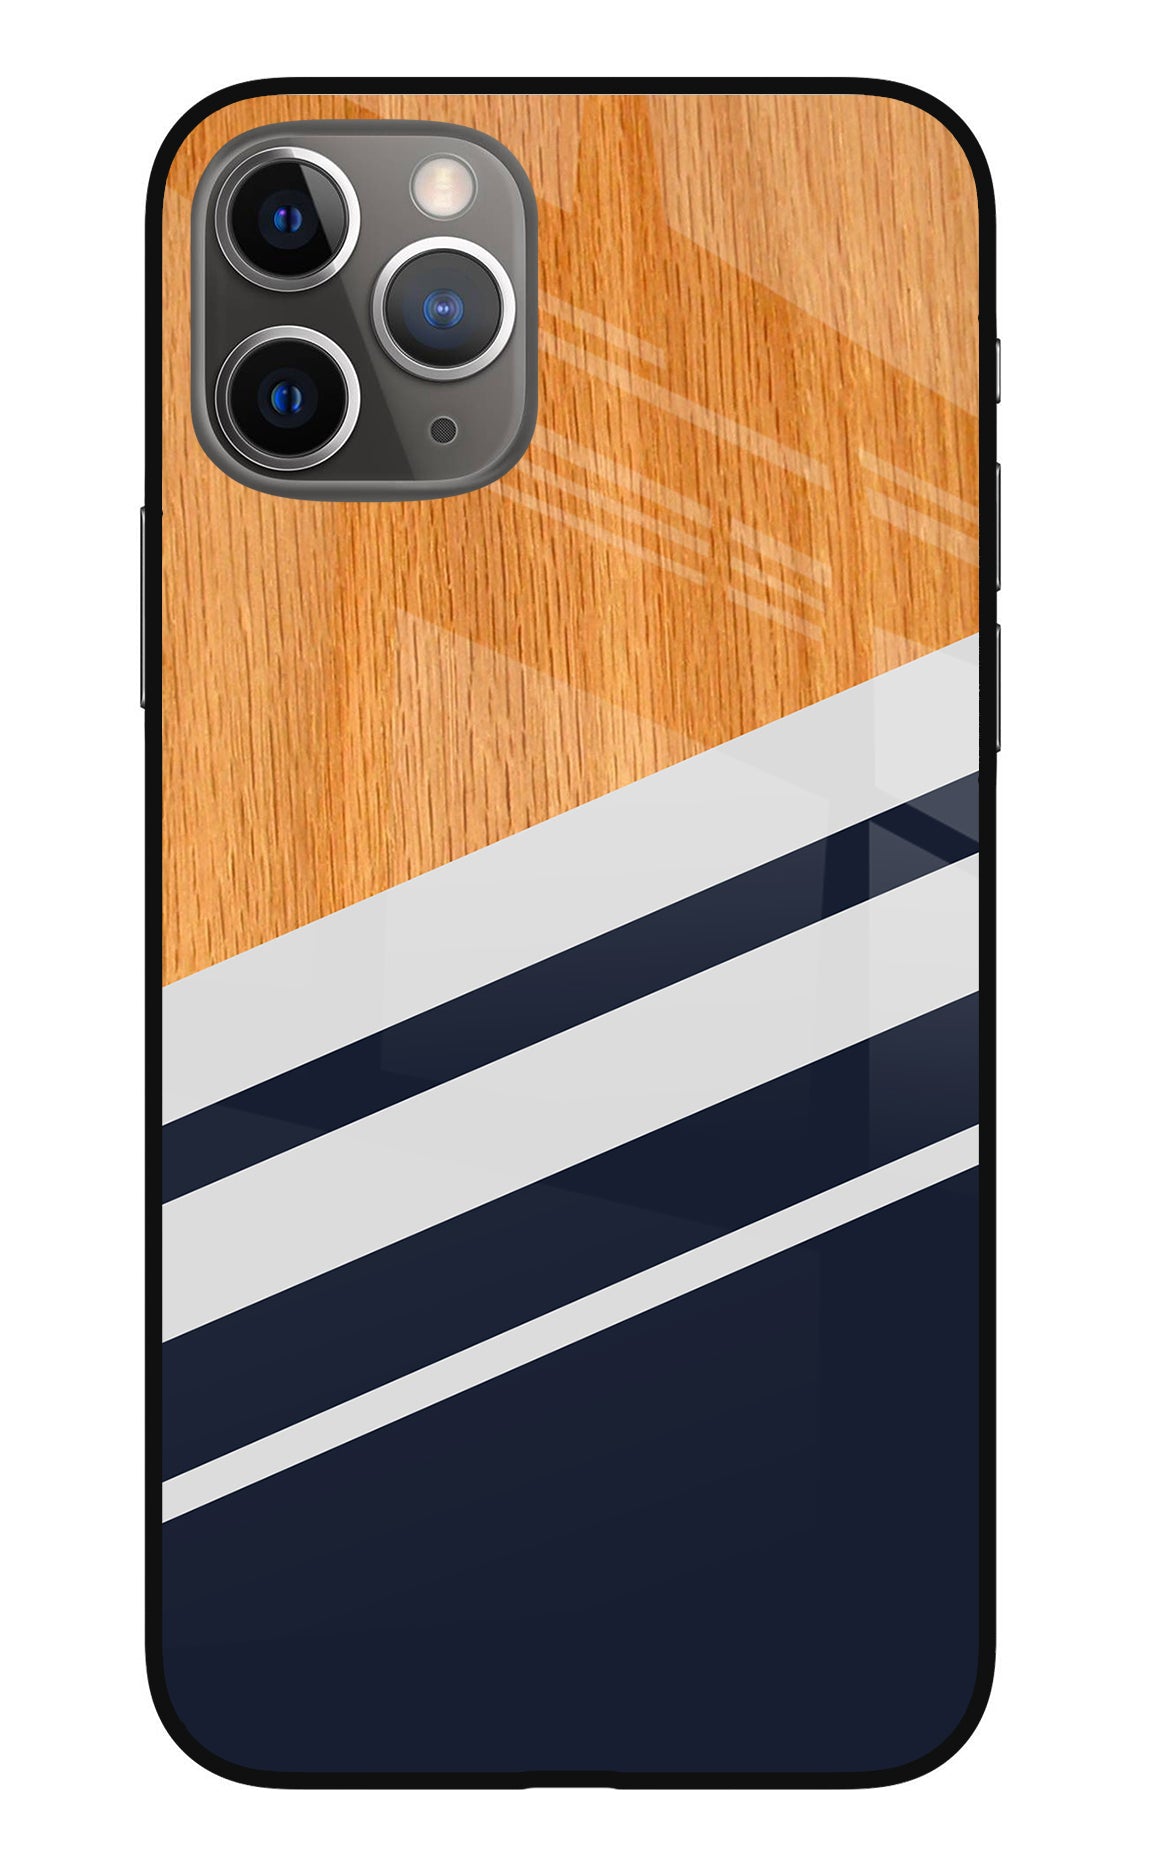 Blue and white wooden iPhone 11 Pro Back Cover